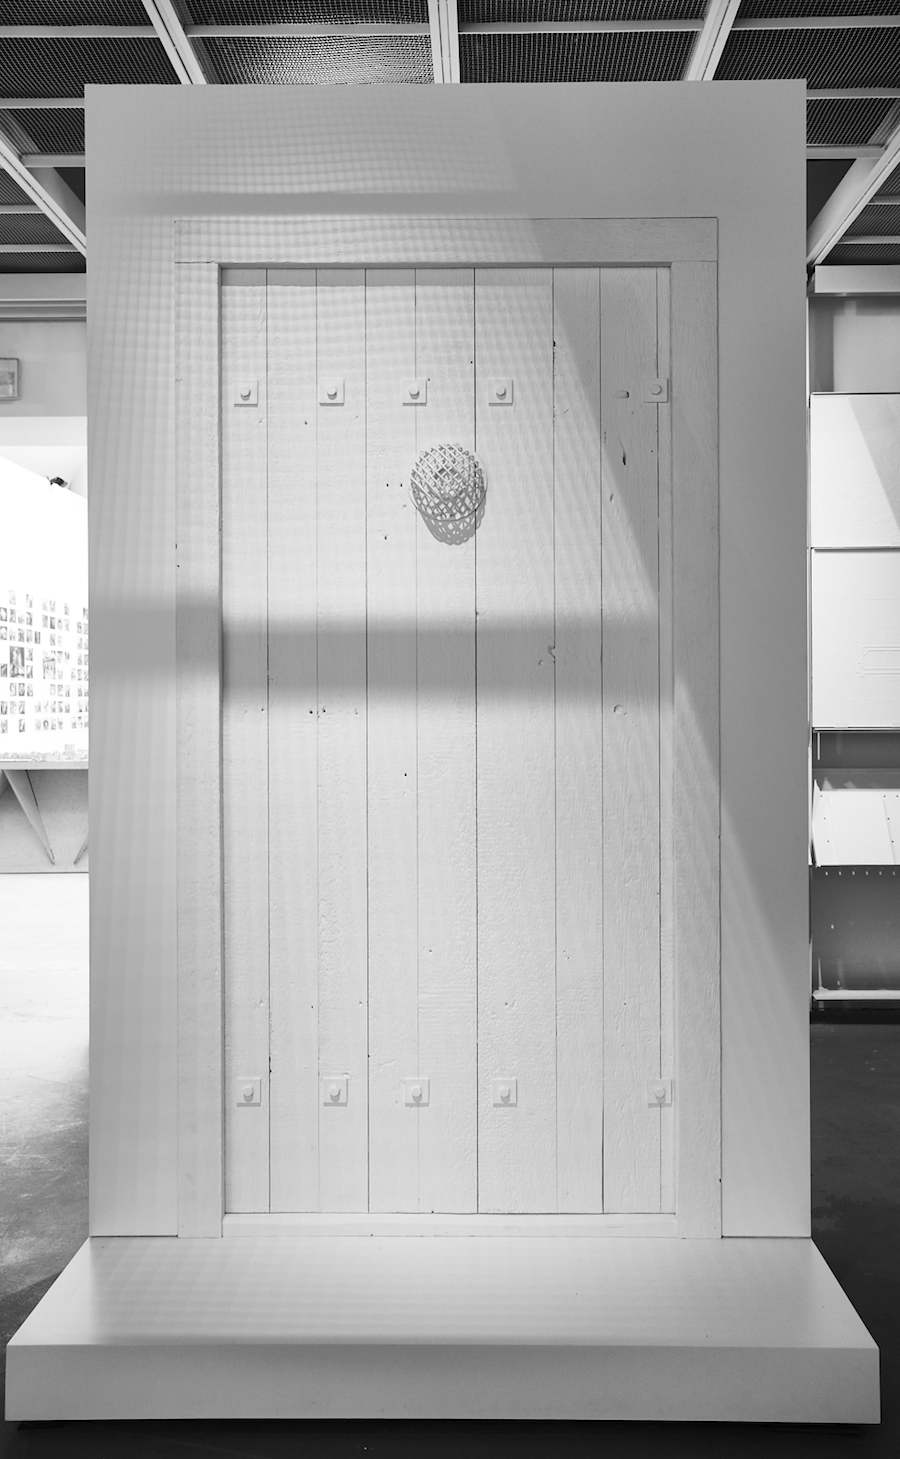 Model of the victim side of gastight door in The Evidence Room. Photo by Fred Hunsberger.